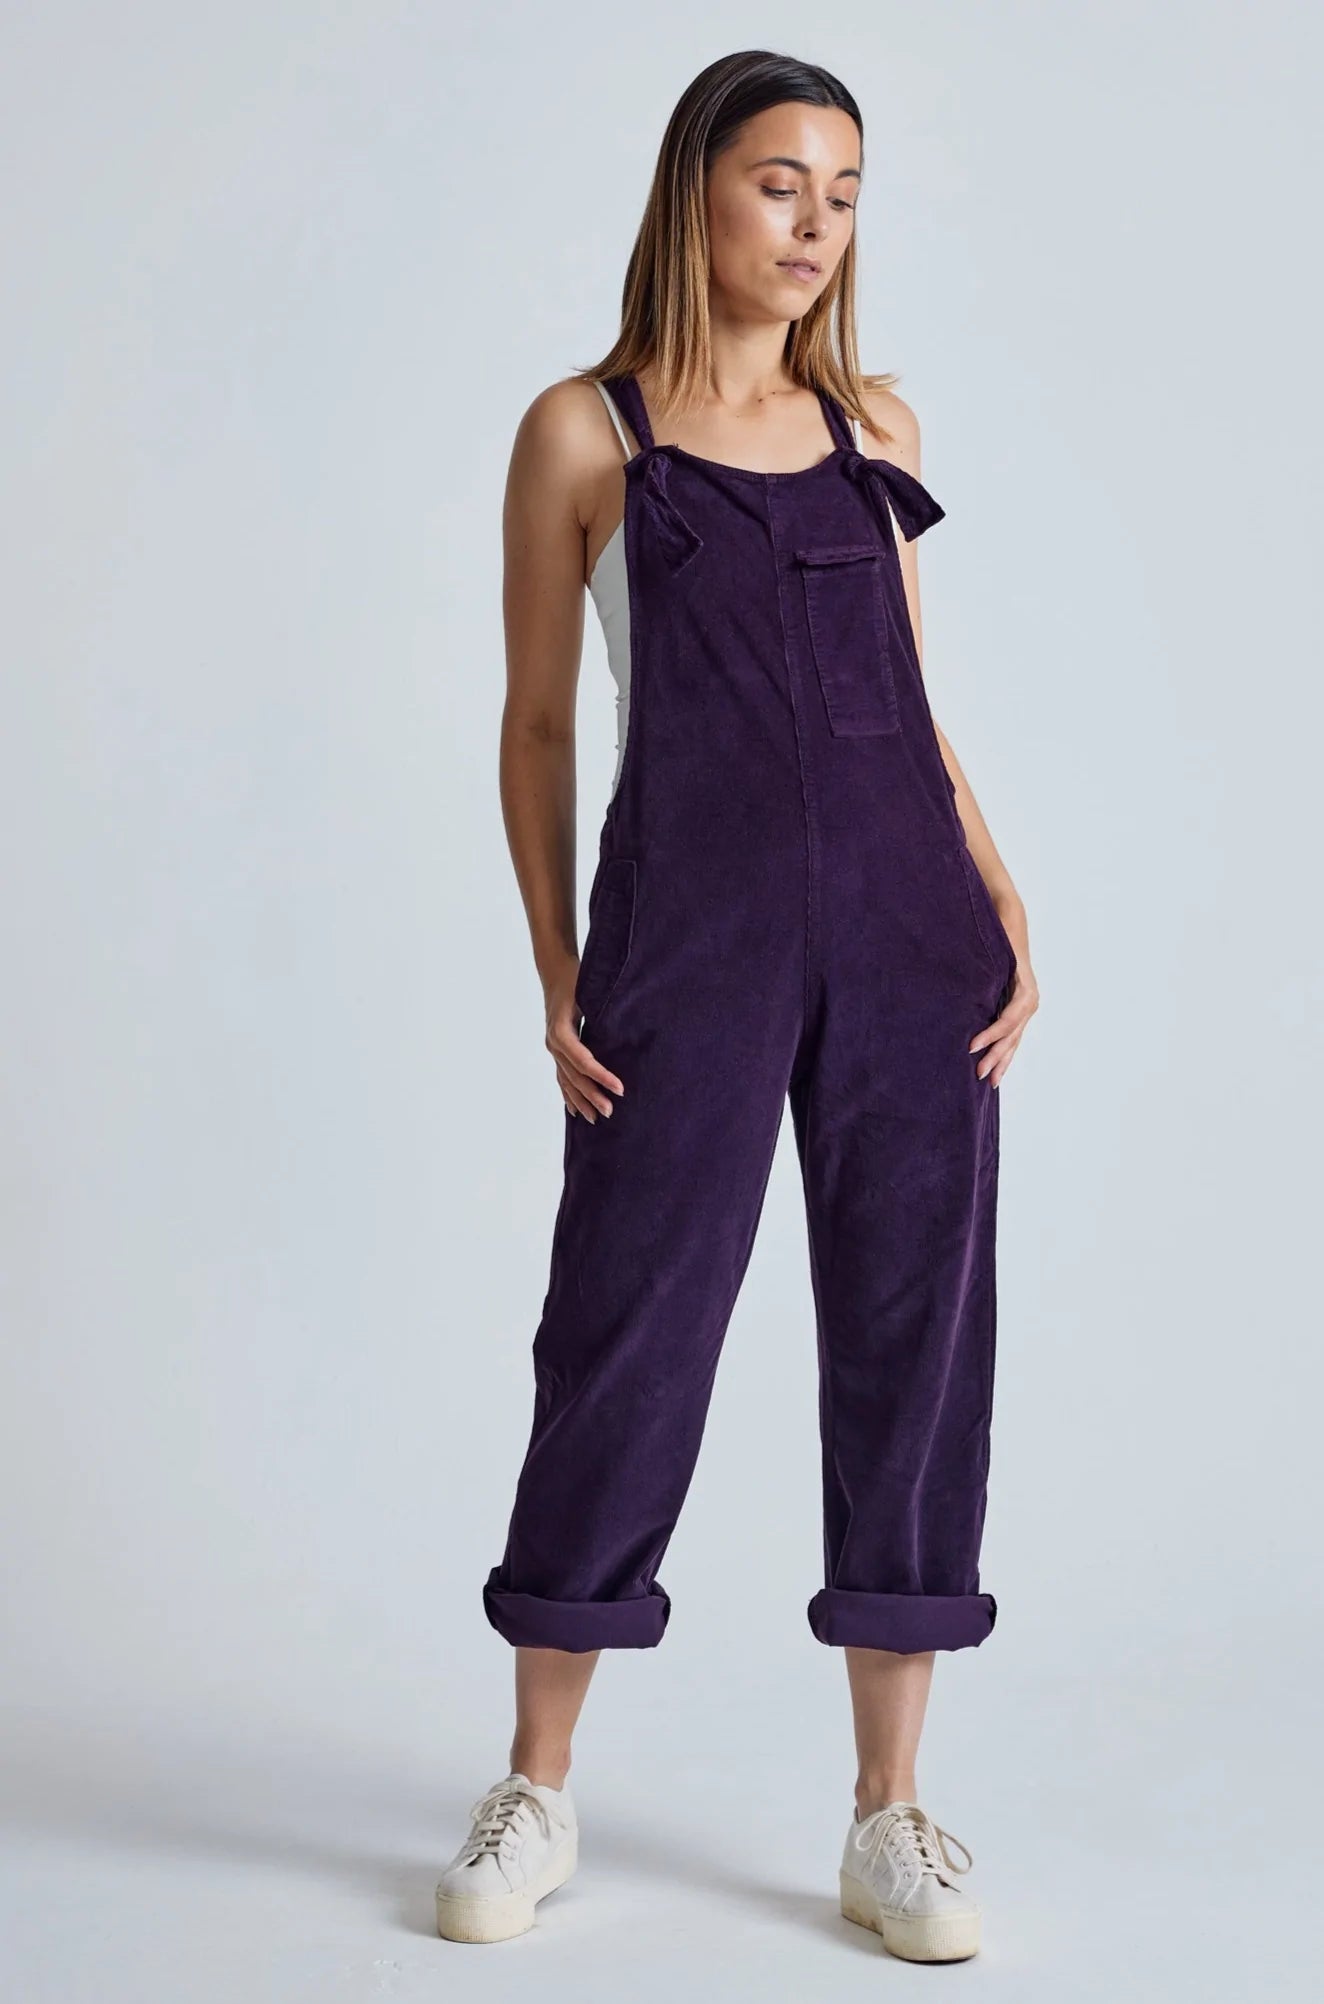 MARY-LOU Aubergine - GOTS Organic Cotton Cord Dungarees by Flax & Loom, SIZE 3 / UK 12 / EUR 40